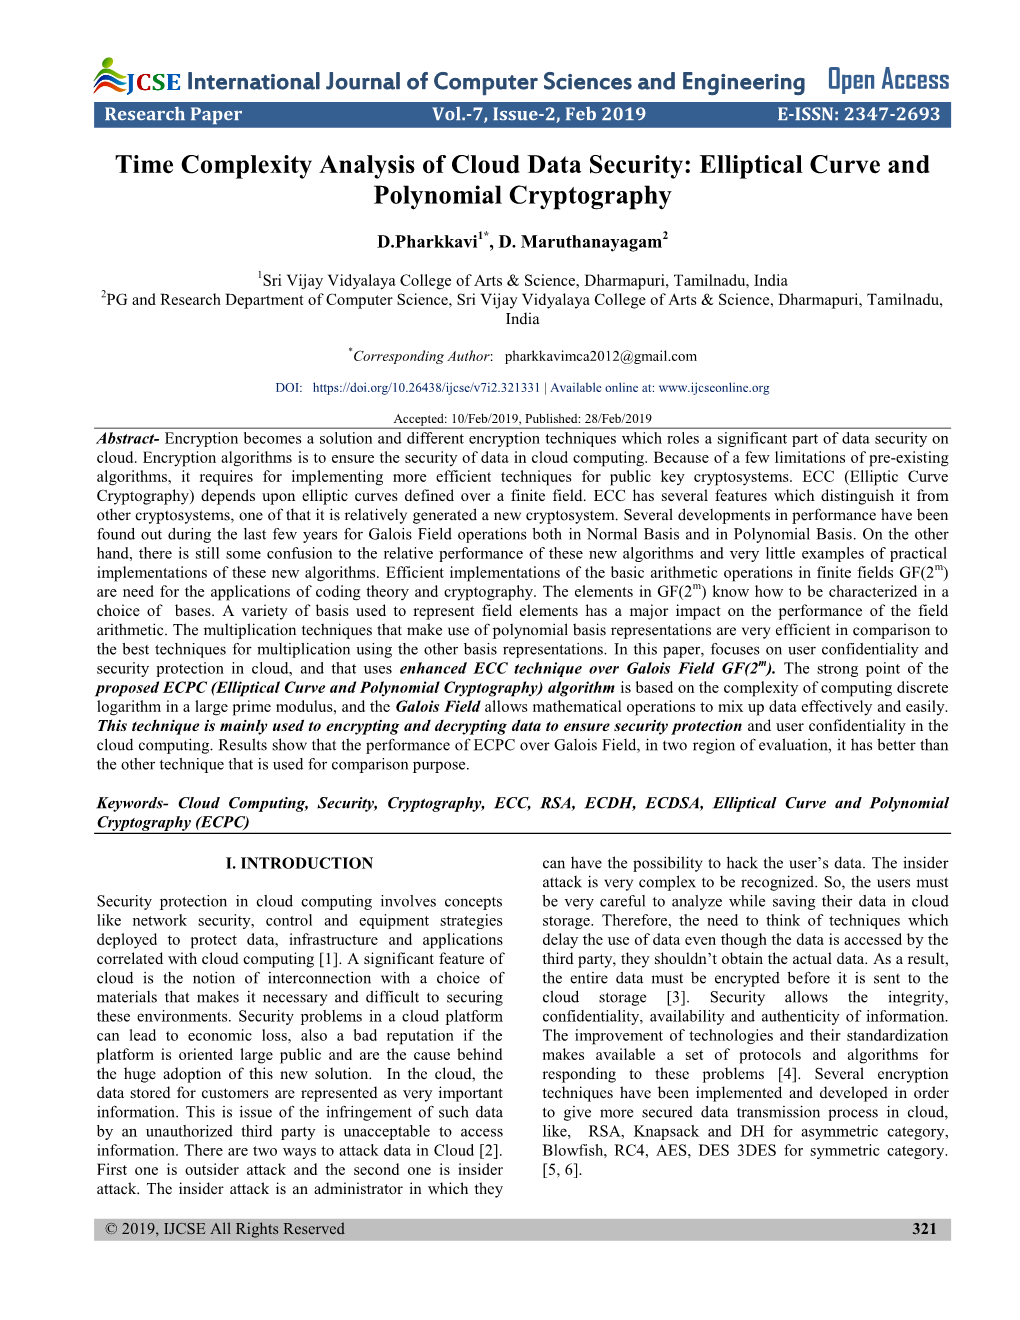 Time Complexity Analysis of Cloud Data Security: Elliptical Curve and Polynomial Cryptography